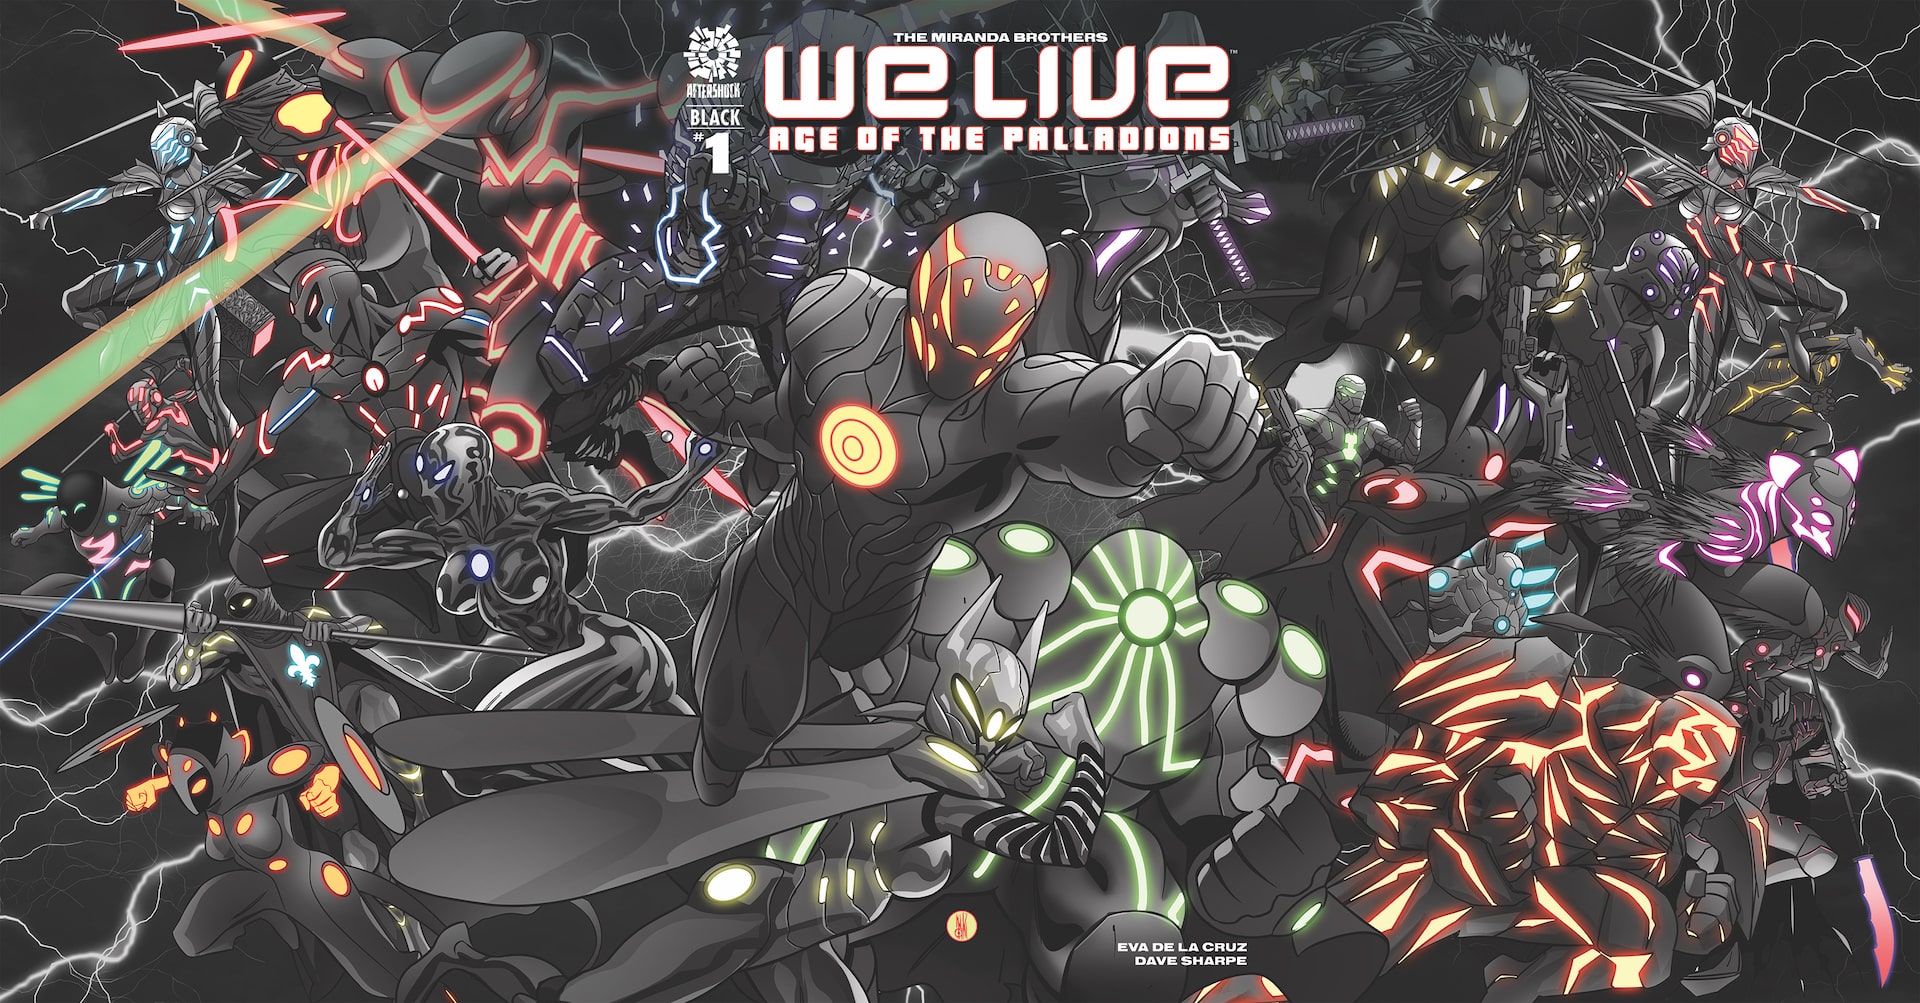 AfterShock announces 'We Live: Age of the Palladions' Black & White